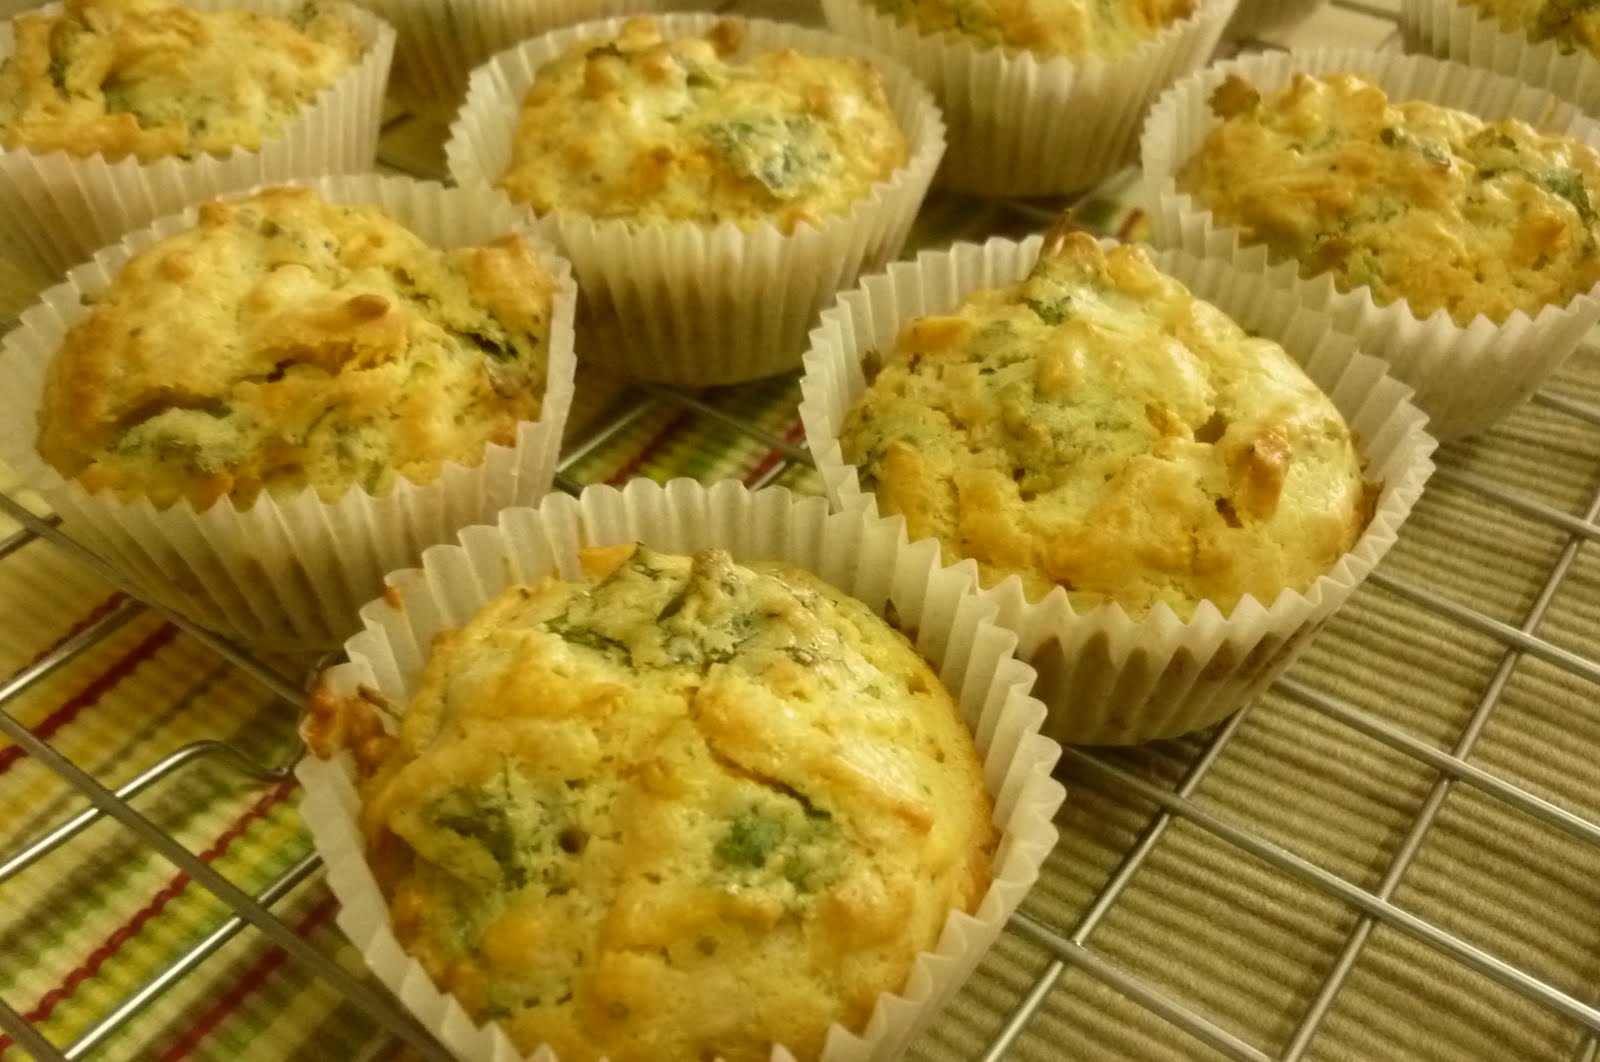 kitchen flavours: Carrot and Coriander Muffins/Strictly for Adults?